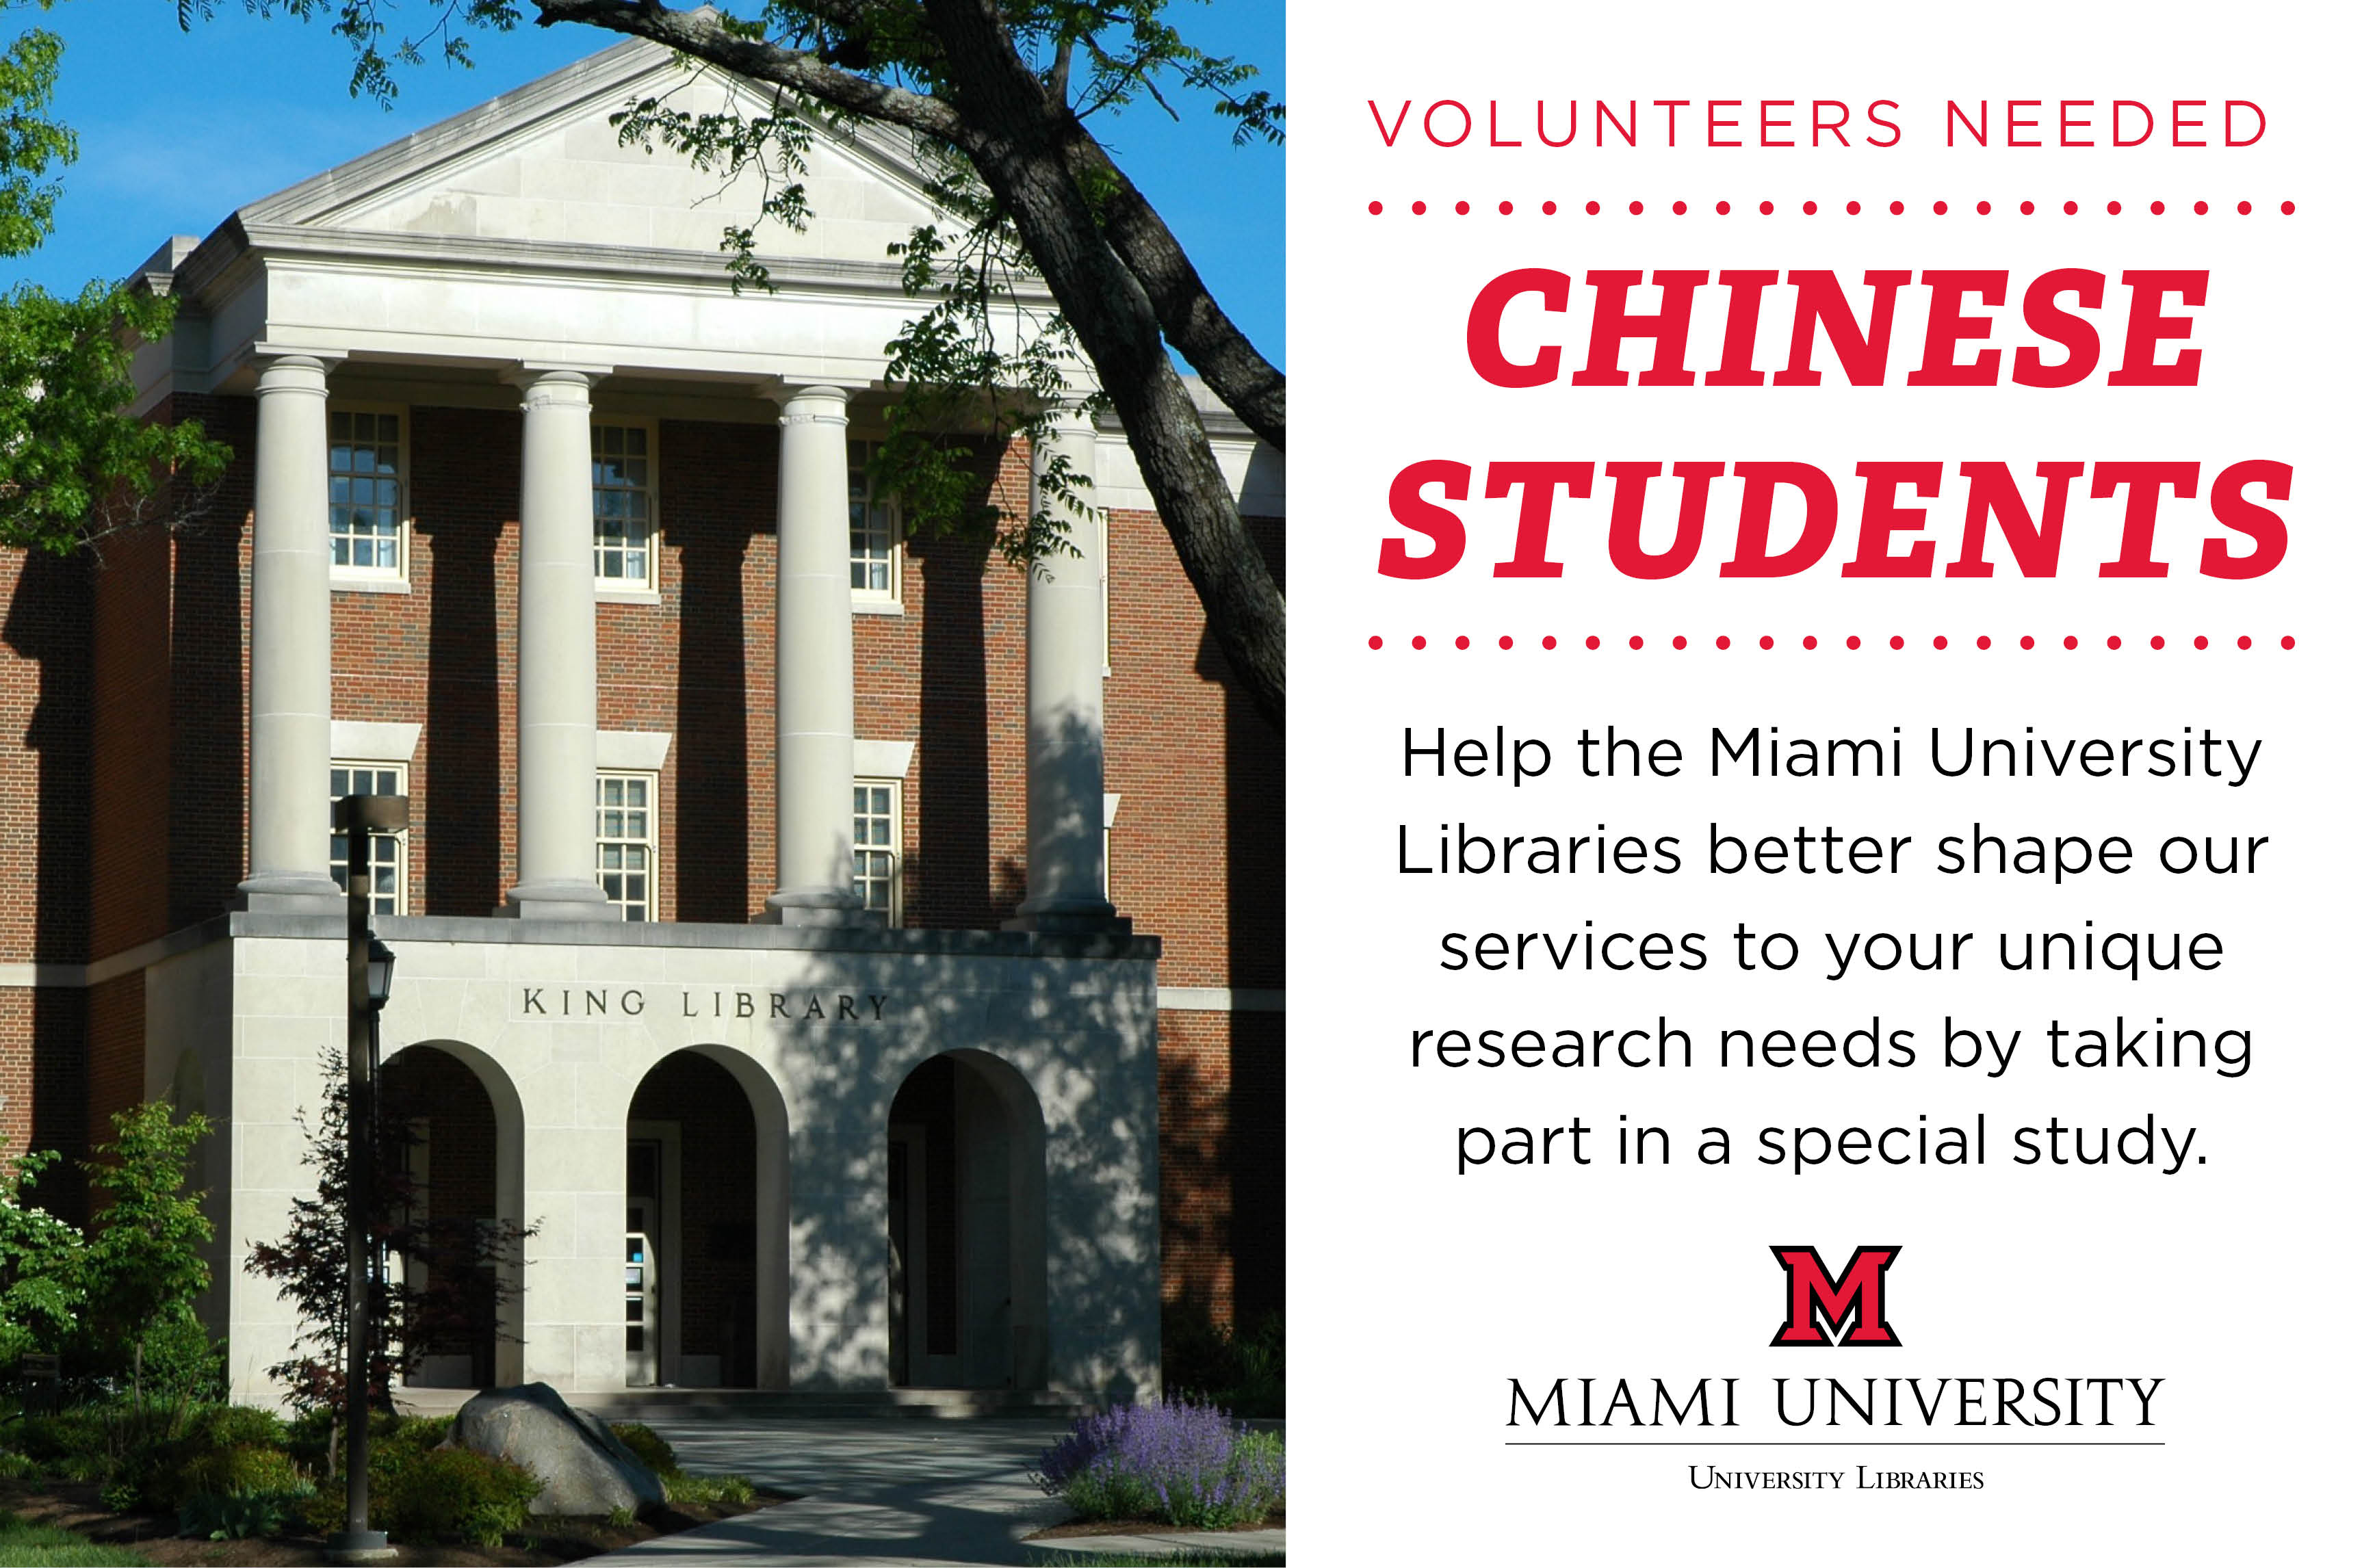 Volunteers needed: Chinese Students - Help the Miami University Libraries better shape our services to your unique research needs by taking part in a special study